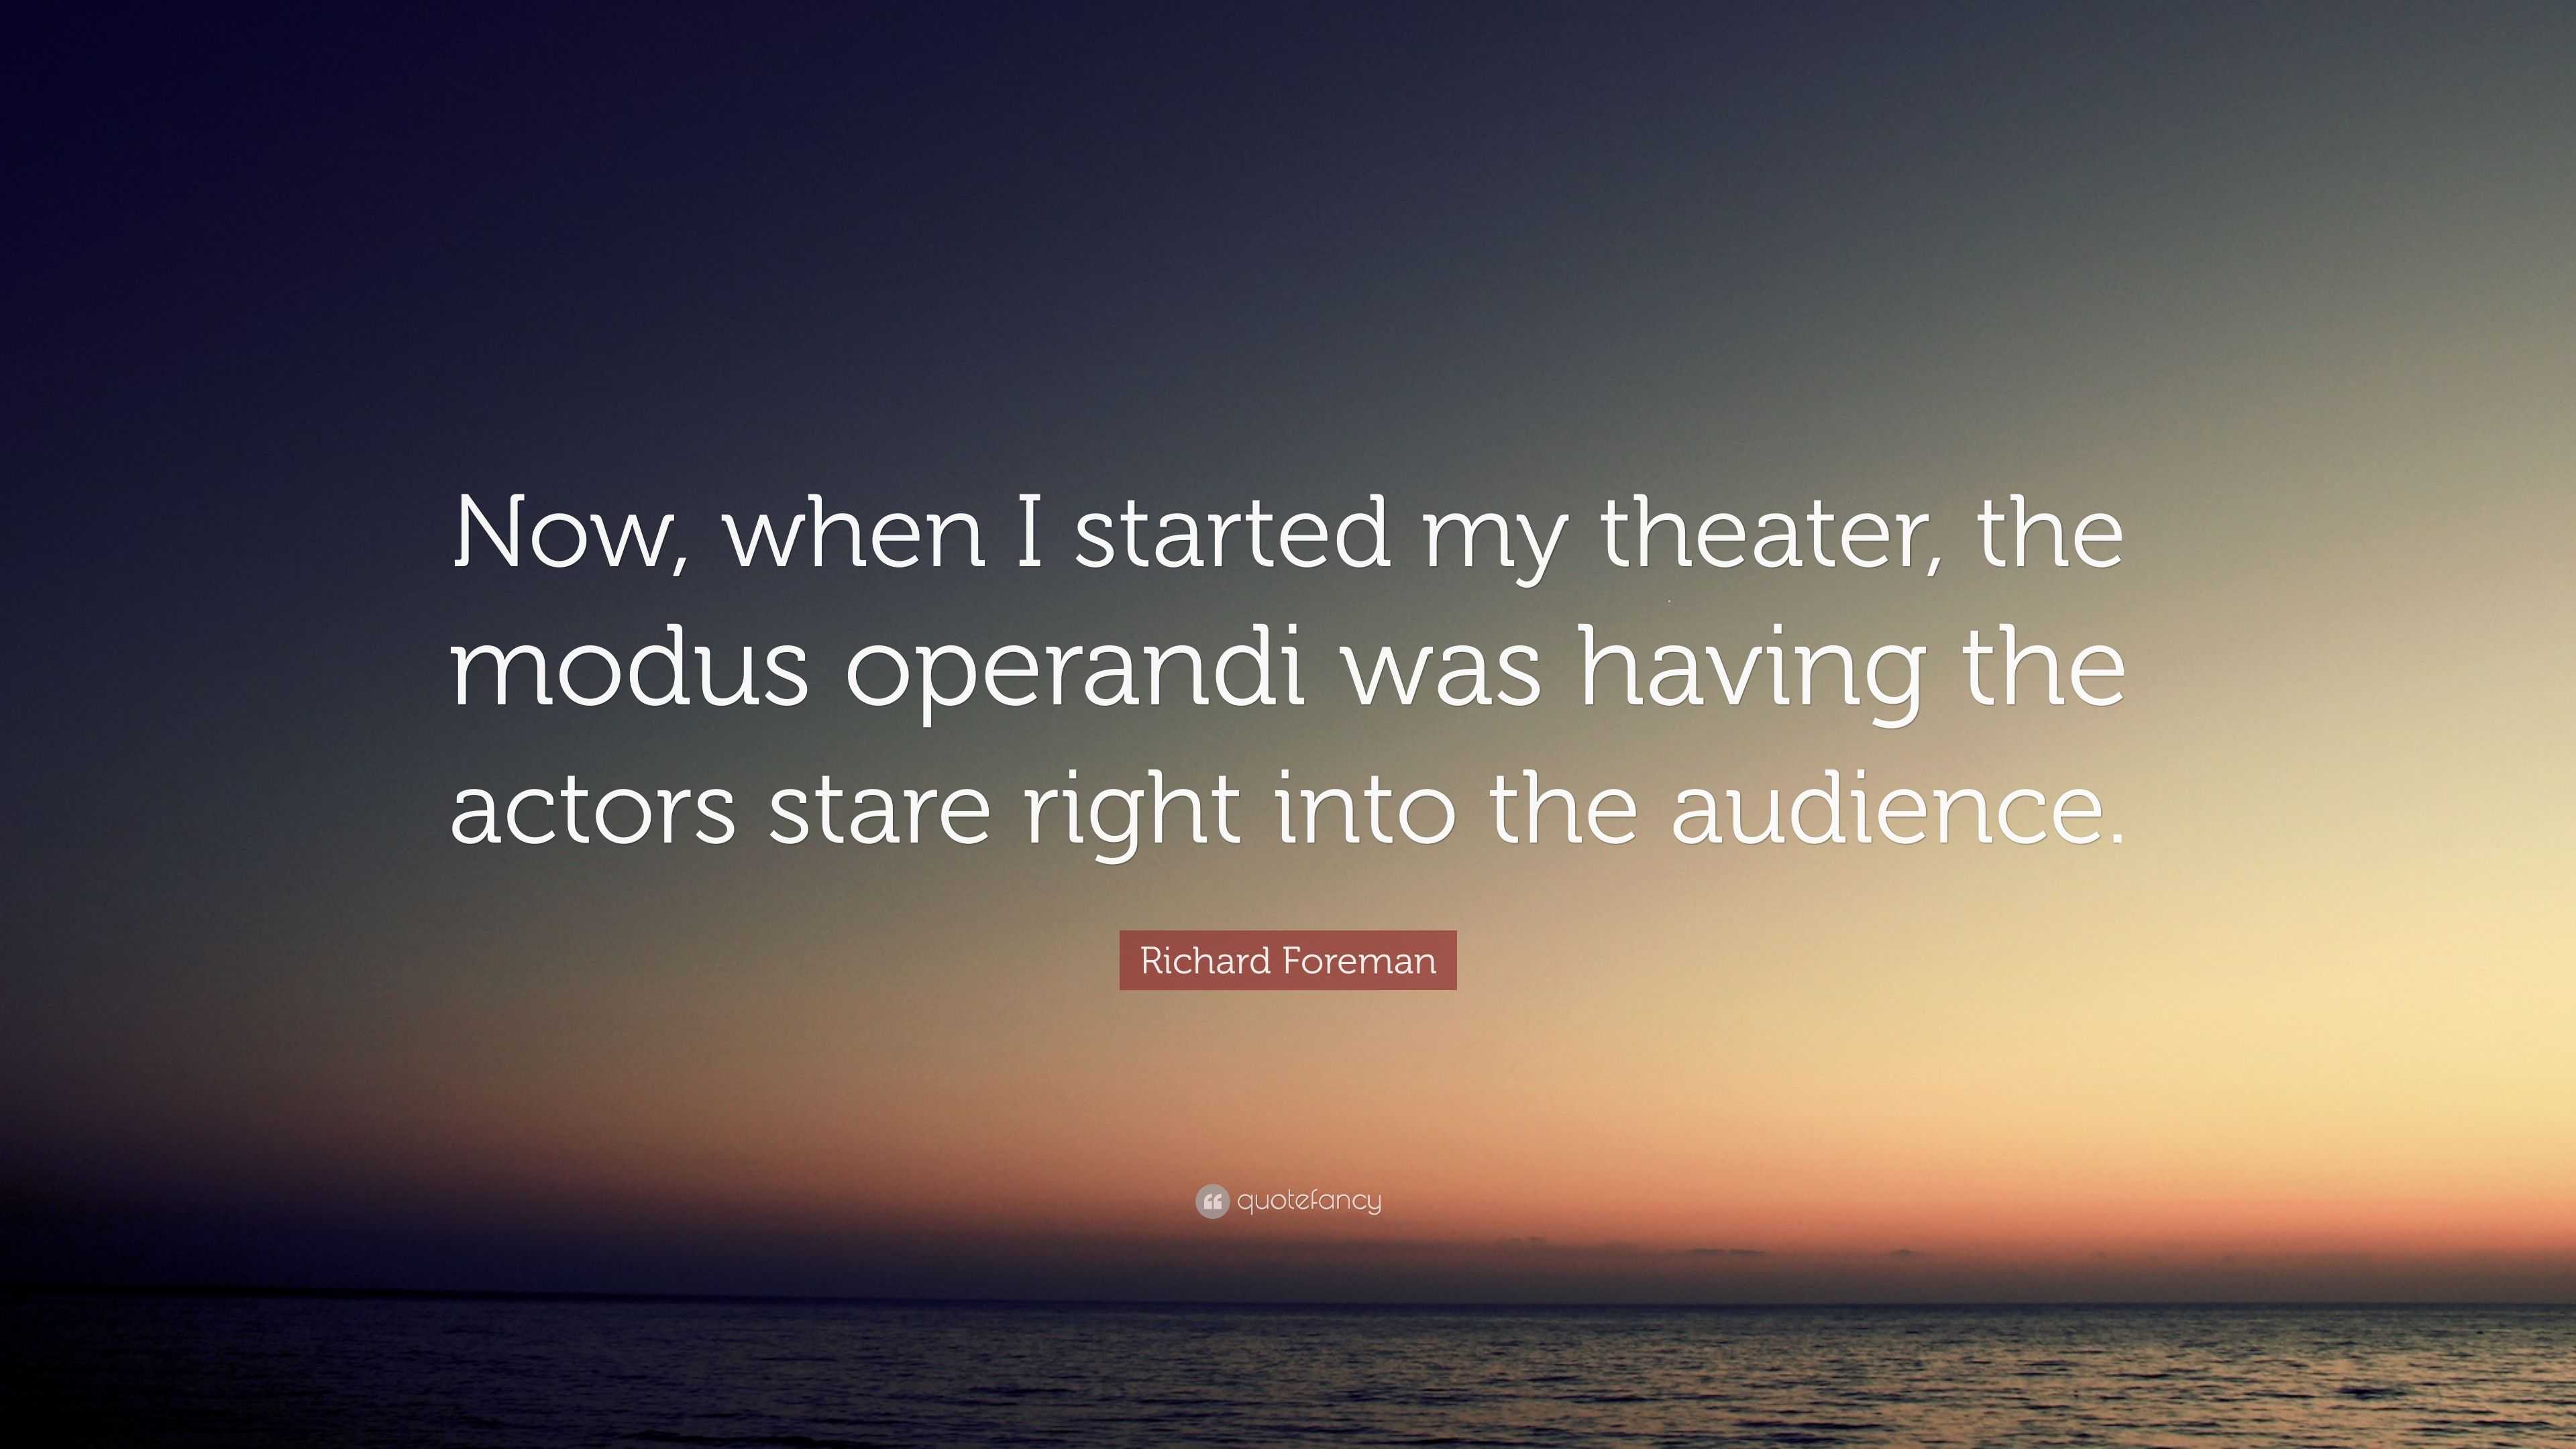 Richard Foreman Quote: “Now, when I started my theater, the modus ...